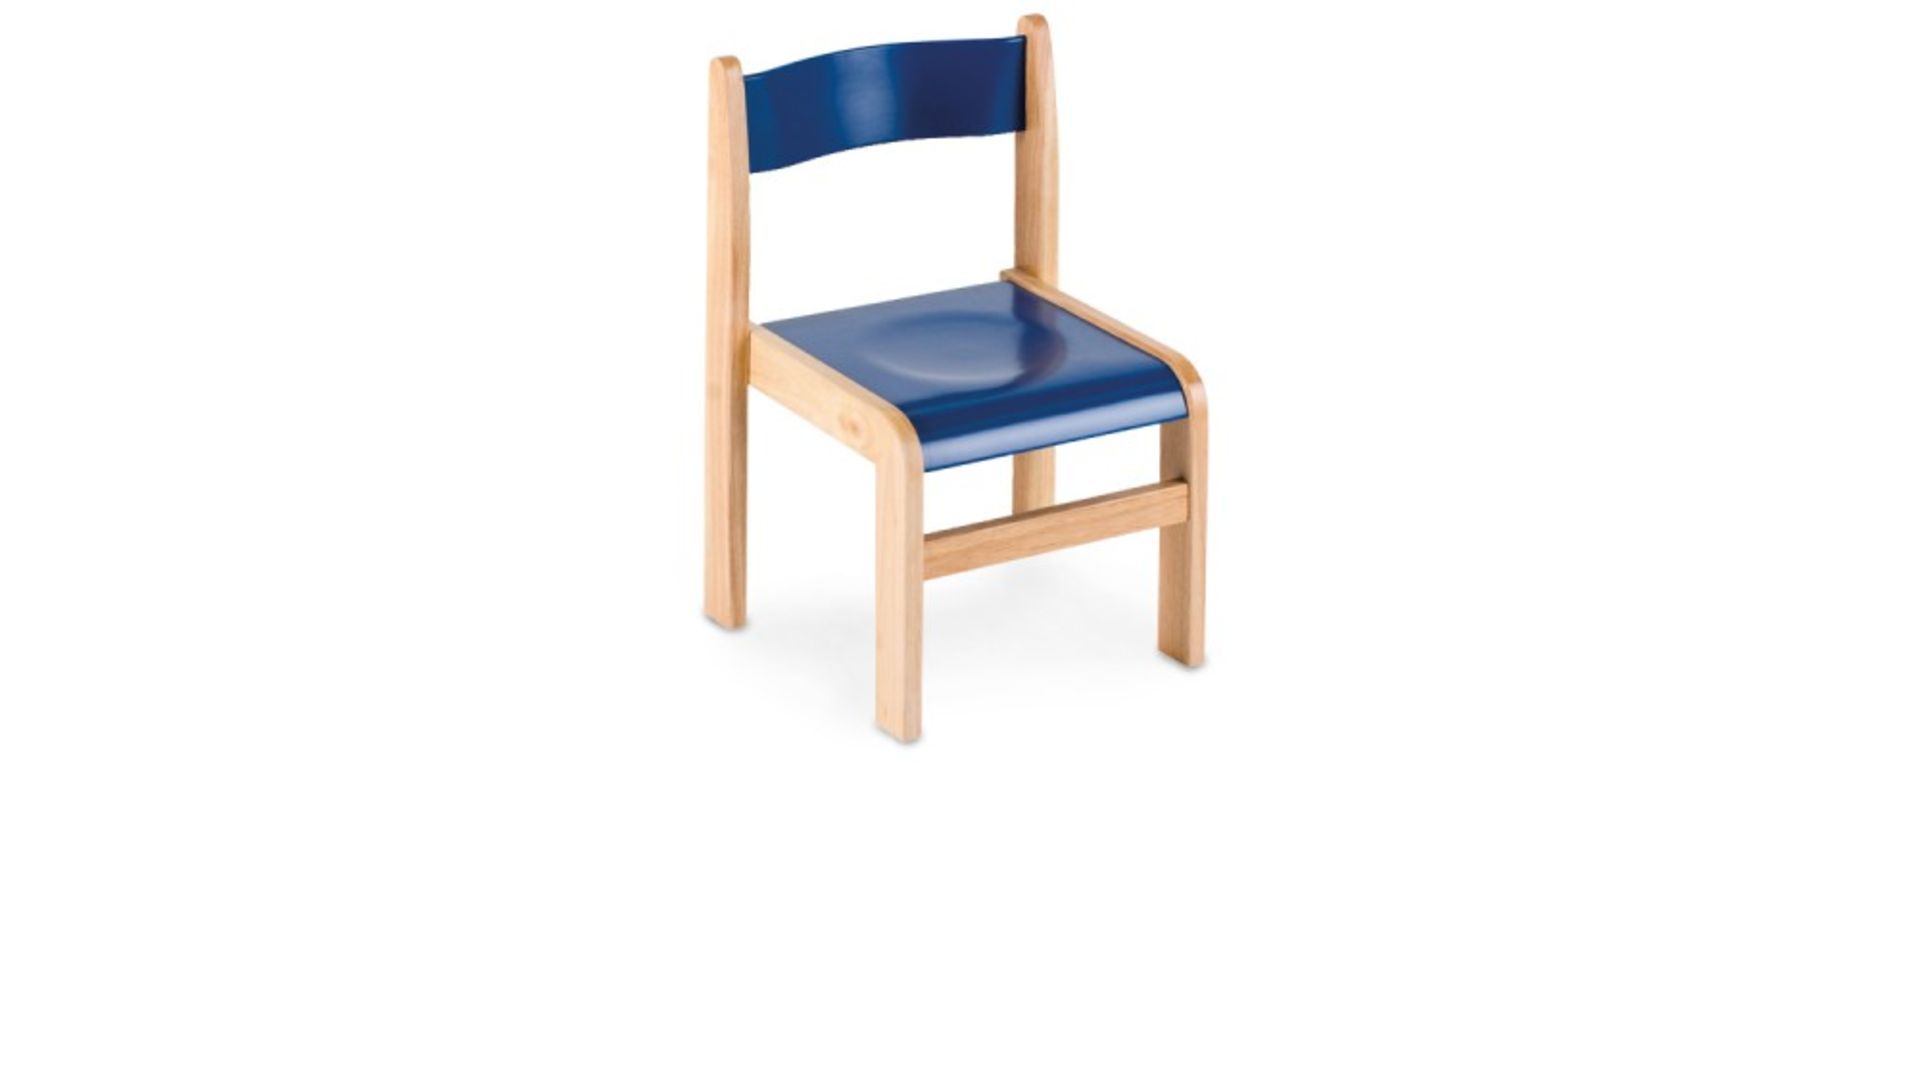 Pallet to Contain 12 x Sets of 2 Tuf Class Wooden Chair Blue. RRP £185 per set, total pallet RRP £